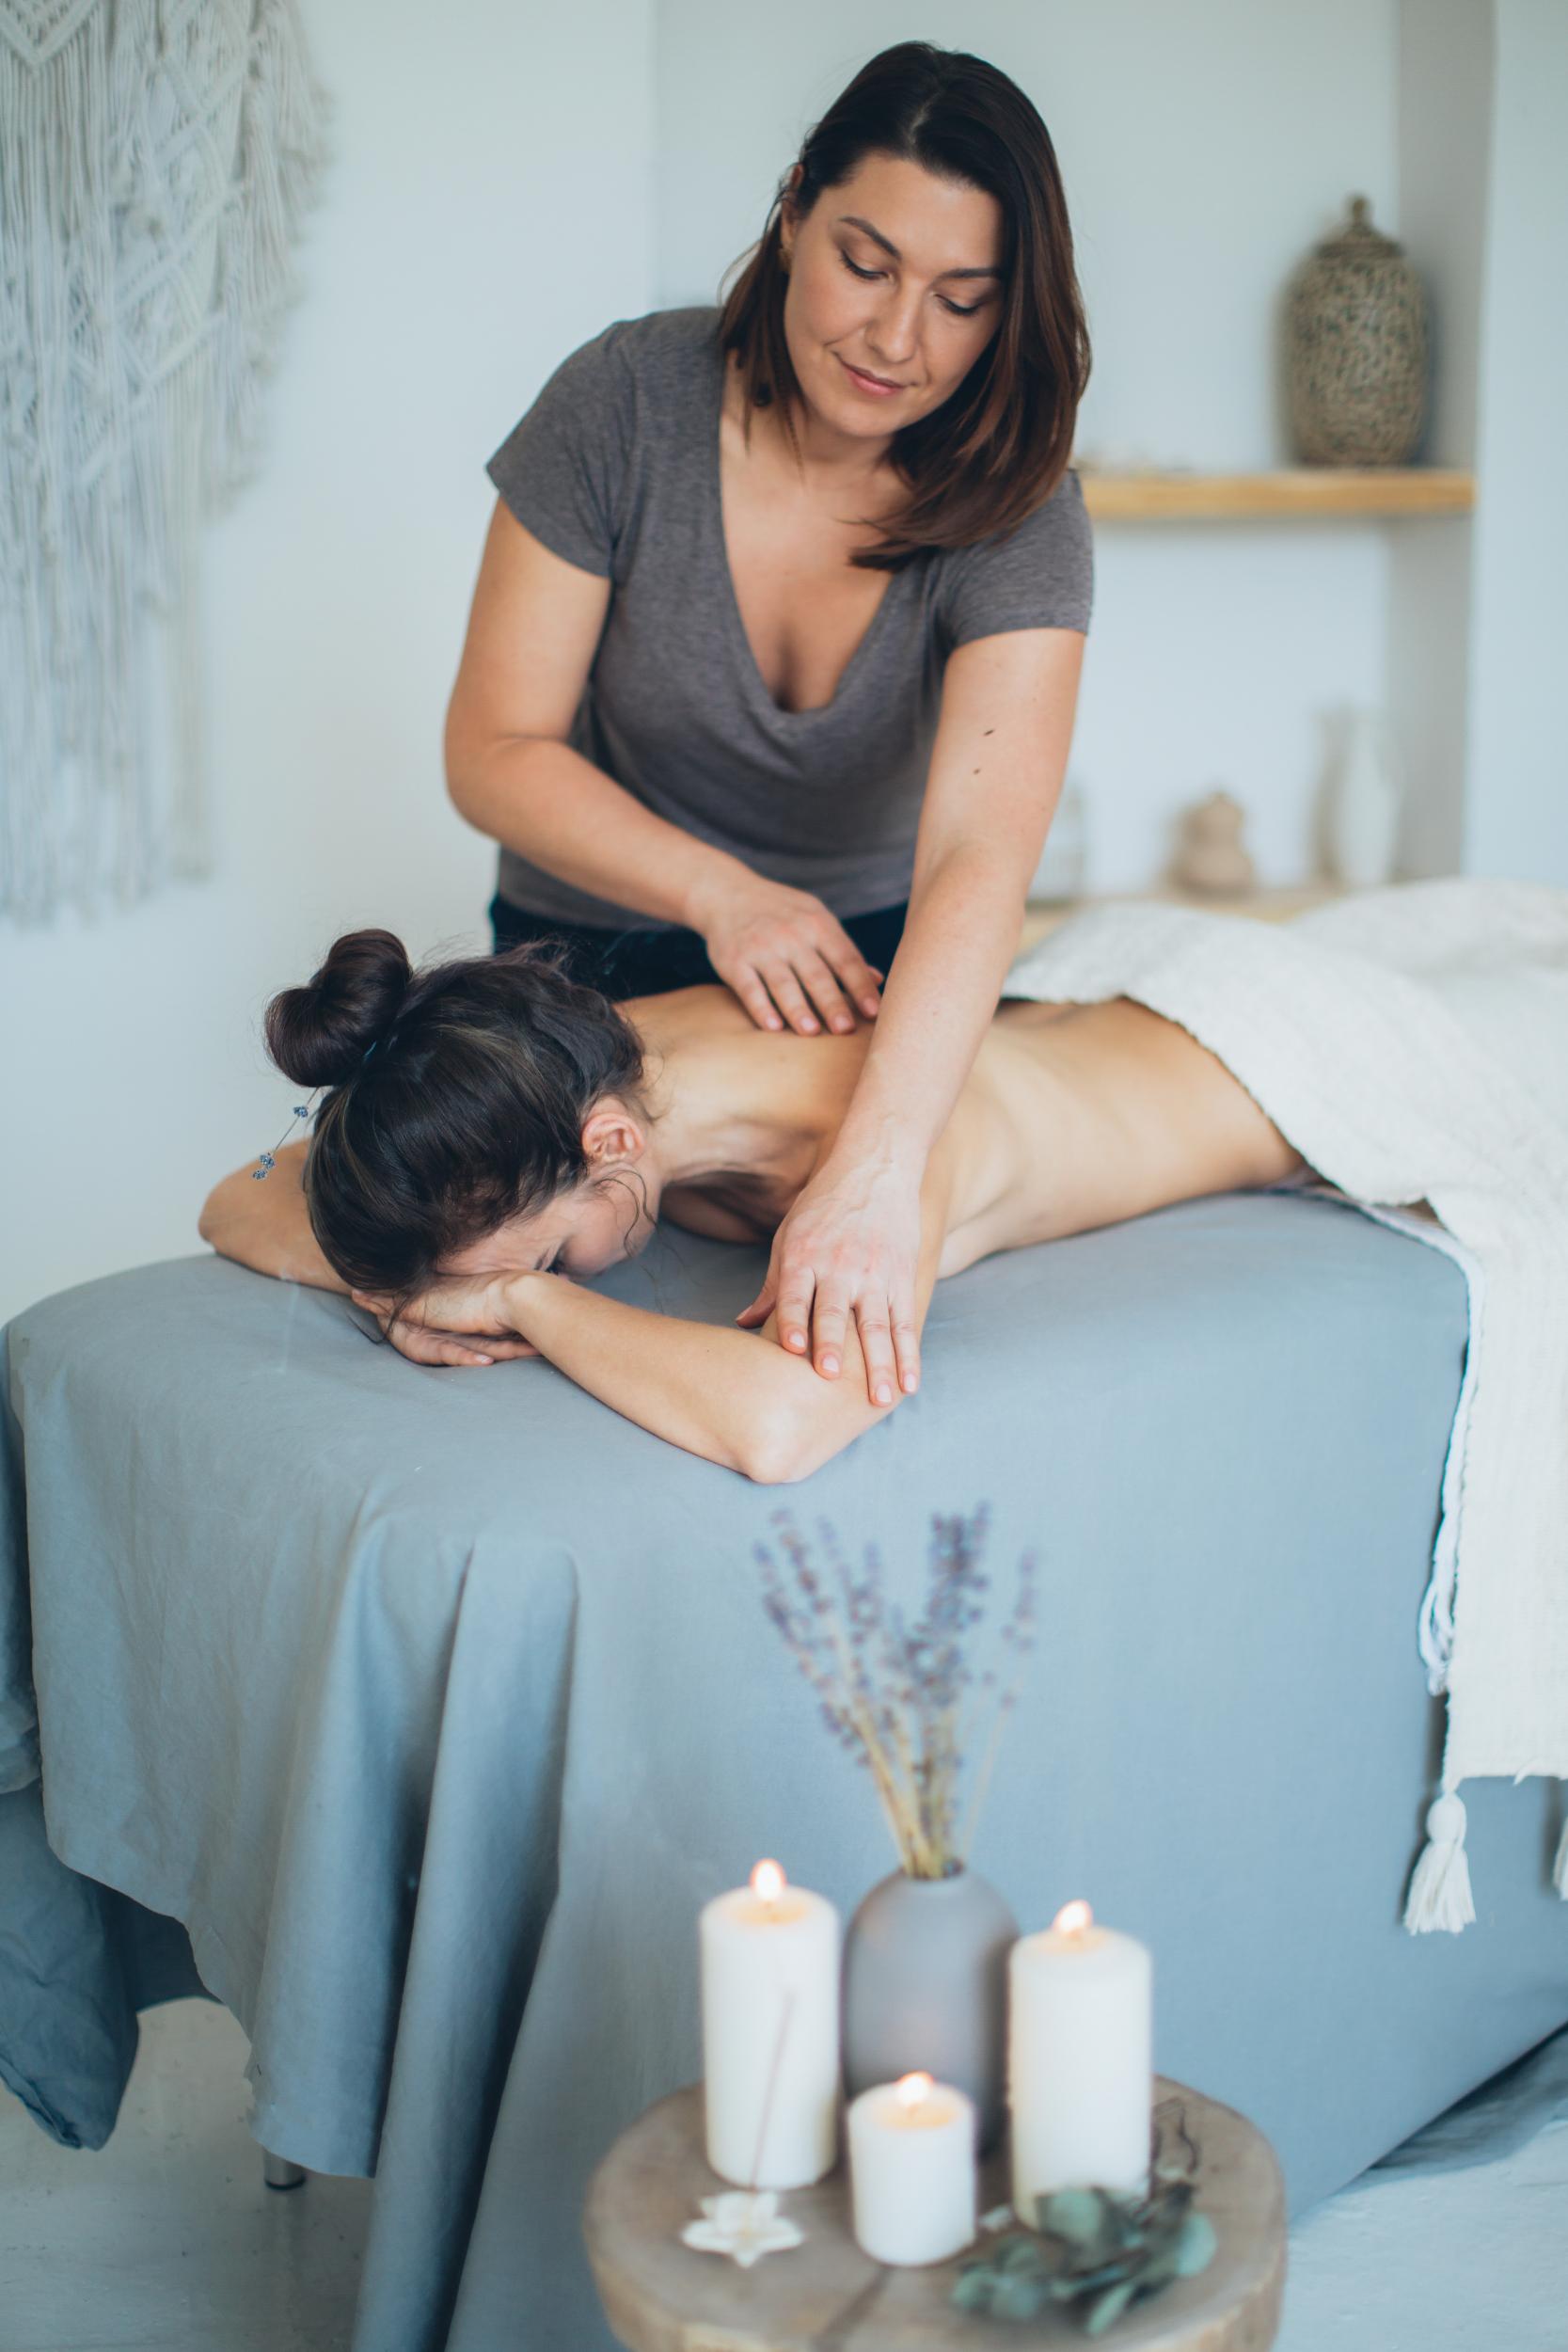 Get Couples Massage Therapy At The Best Fort Saskatchewan Care Franchise